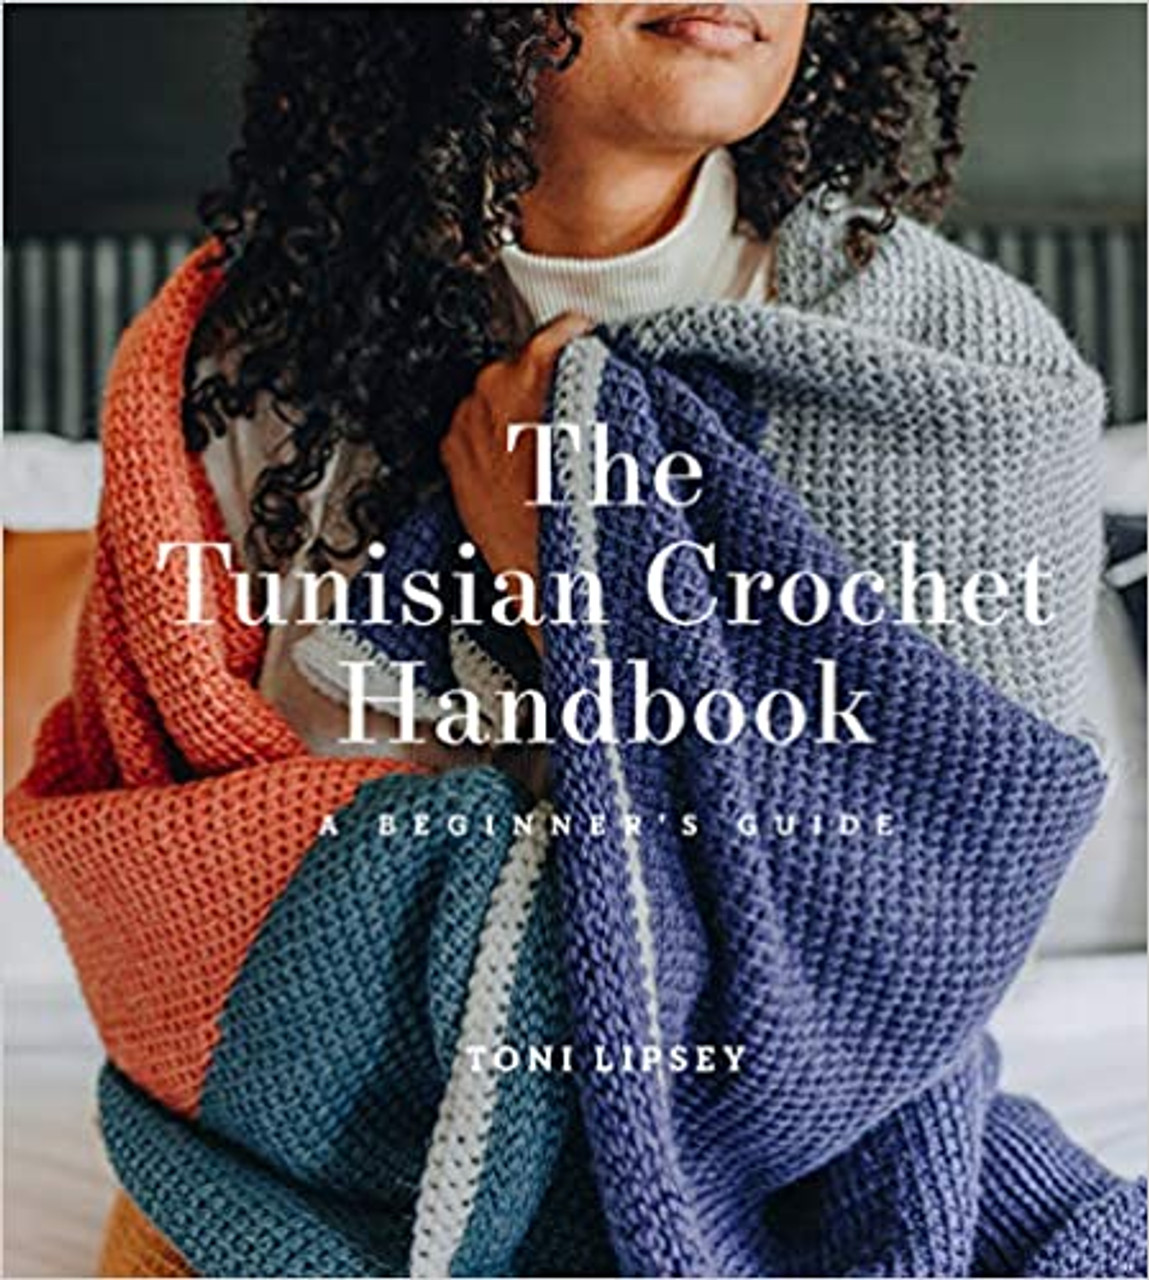 How to Crochet for the Absolute Beginner Book Review